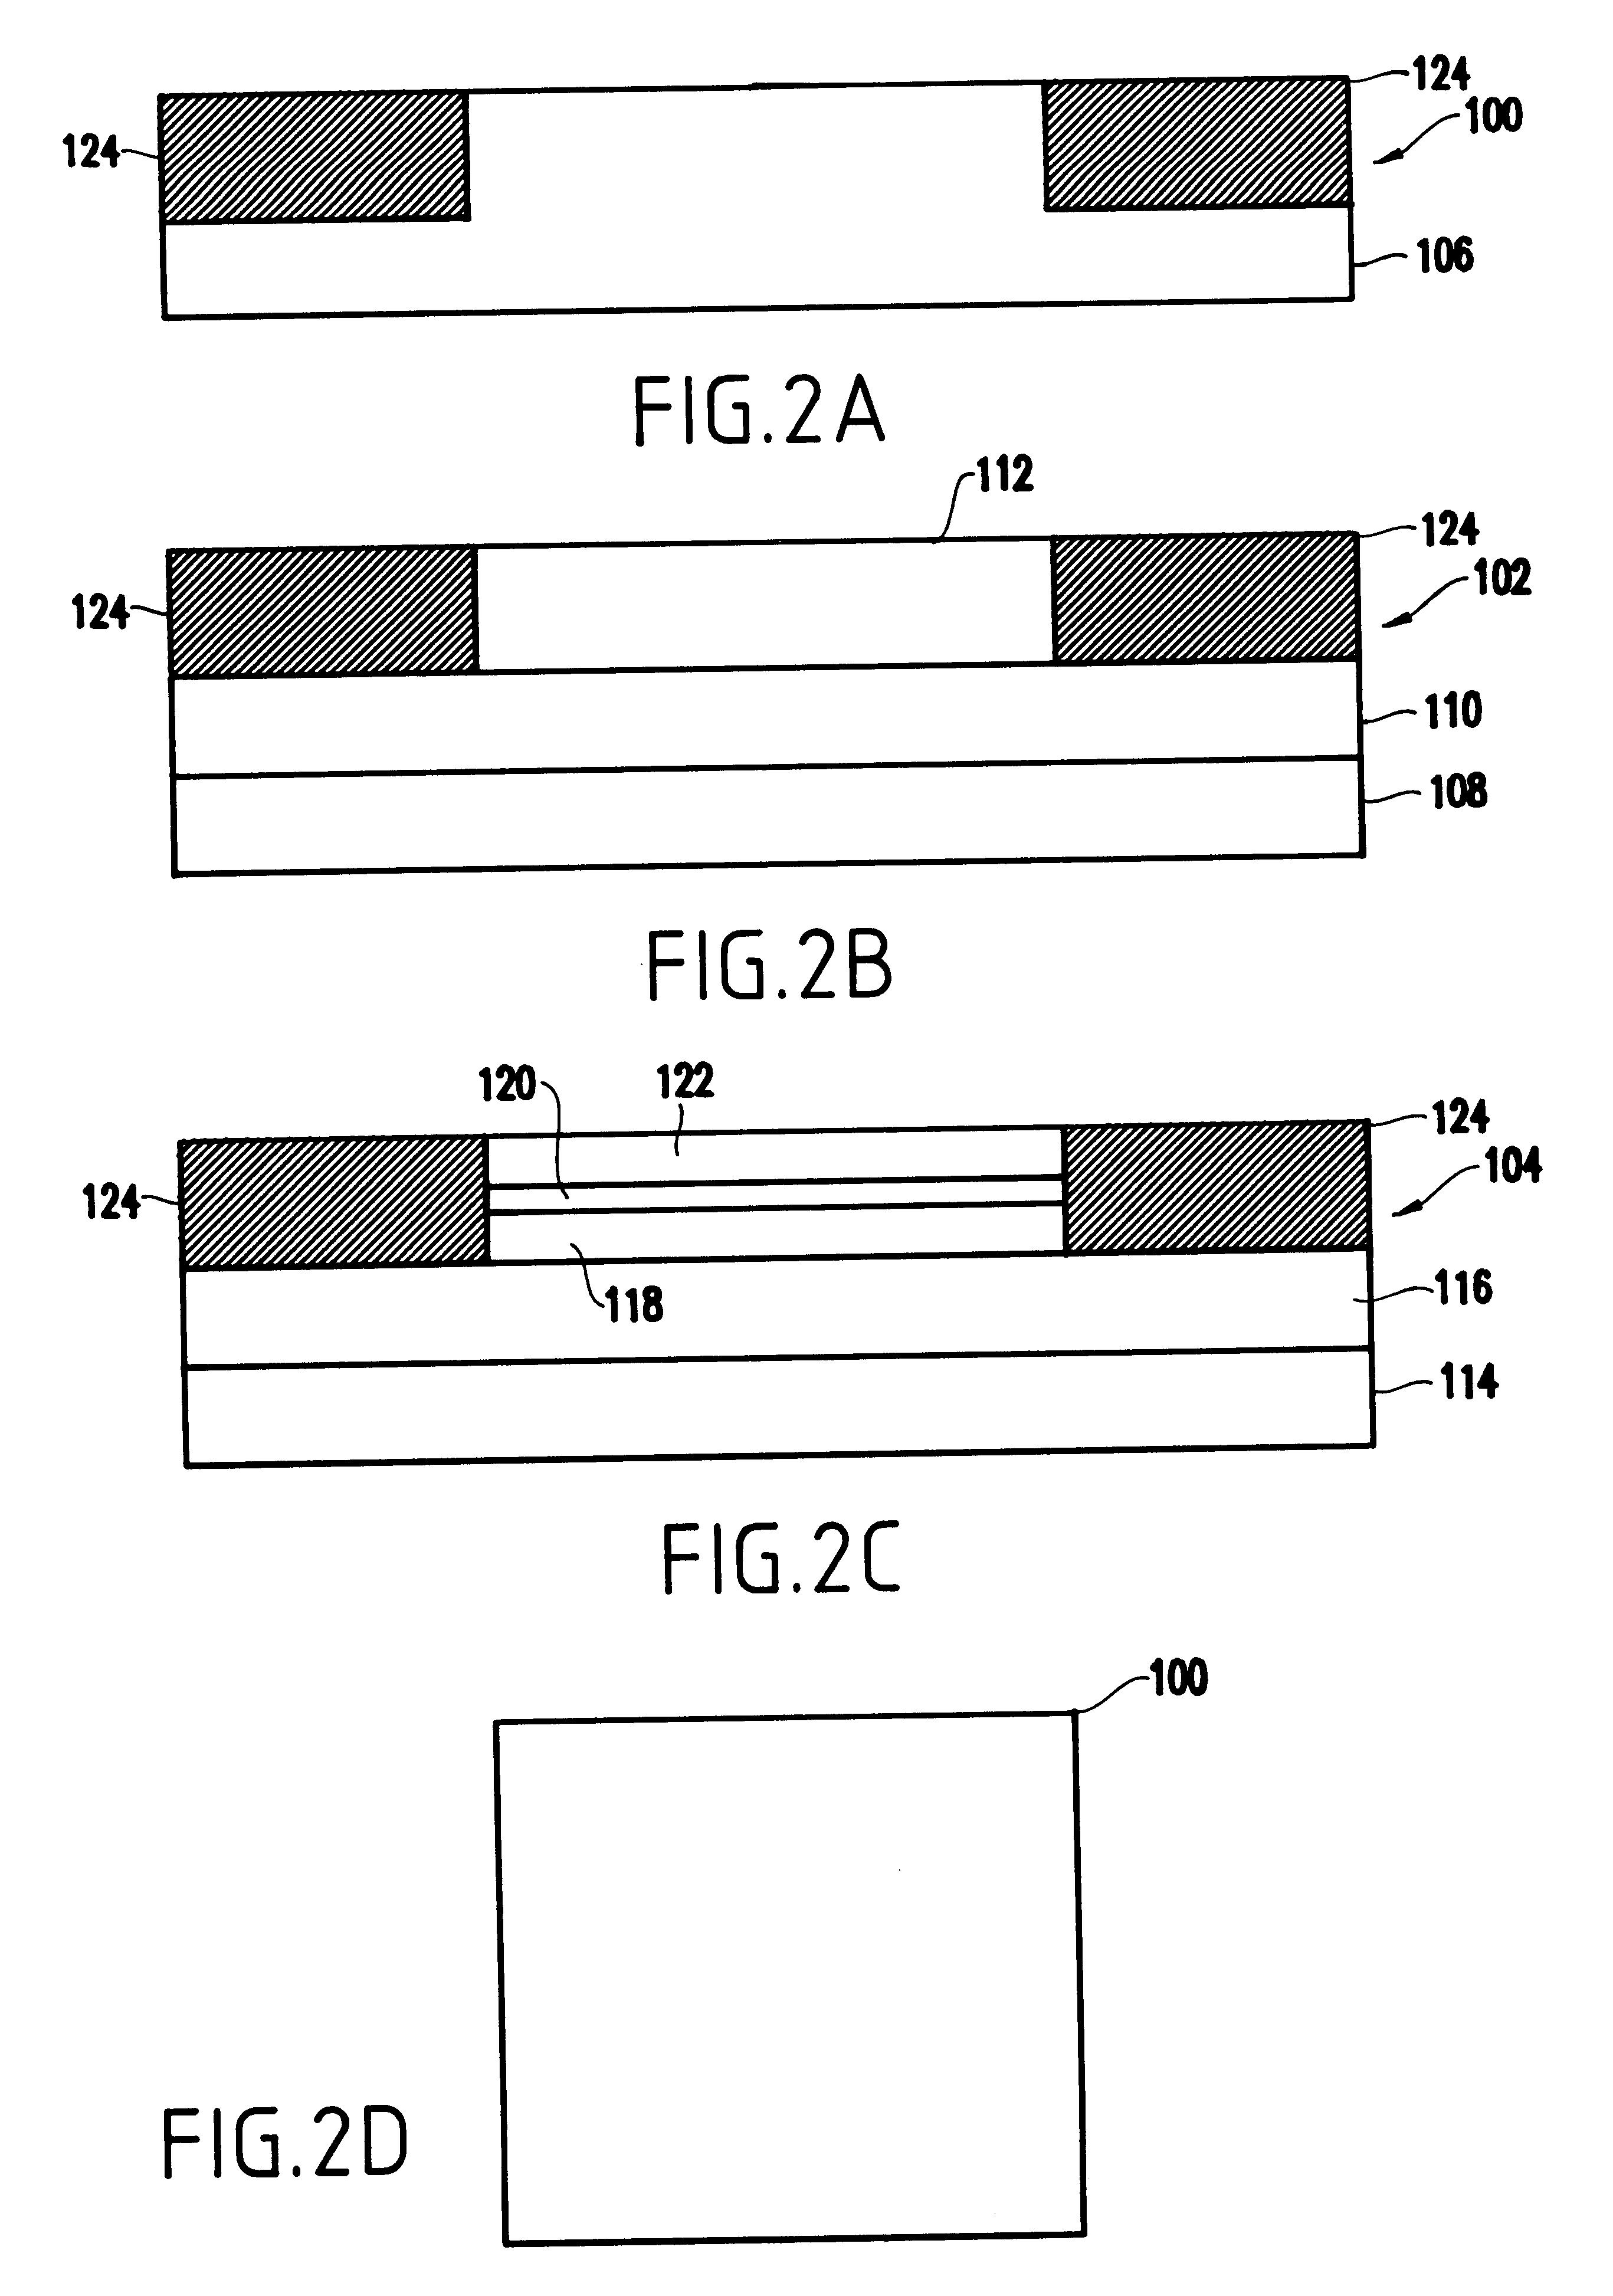 Two-step MOSFET gate formation for high-density devices